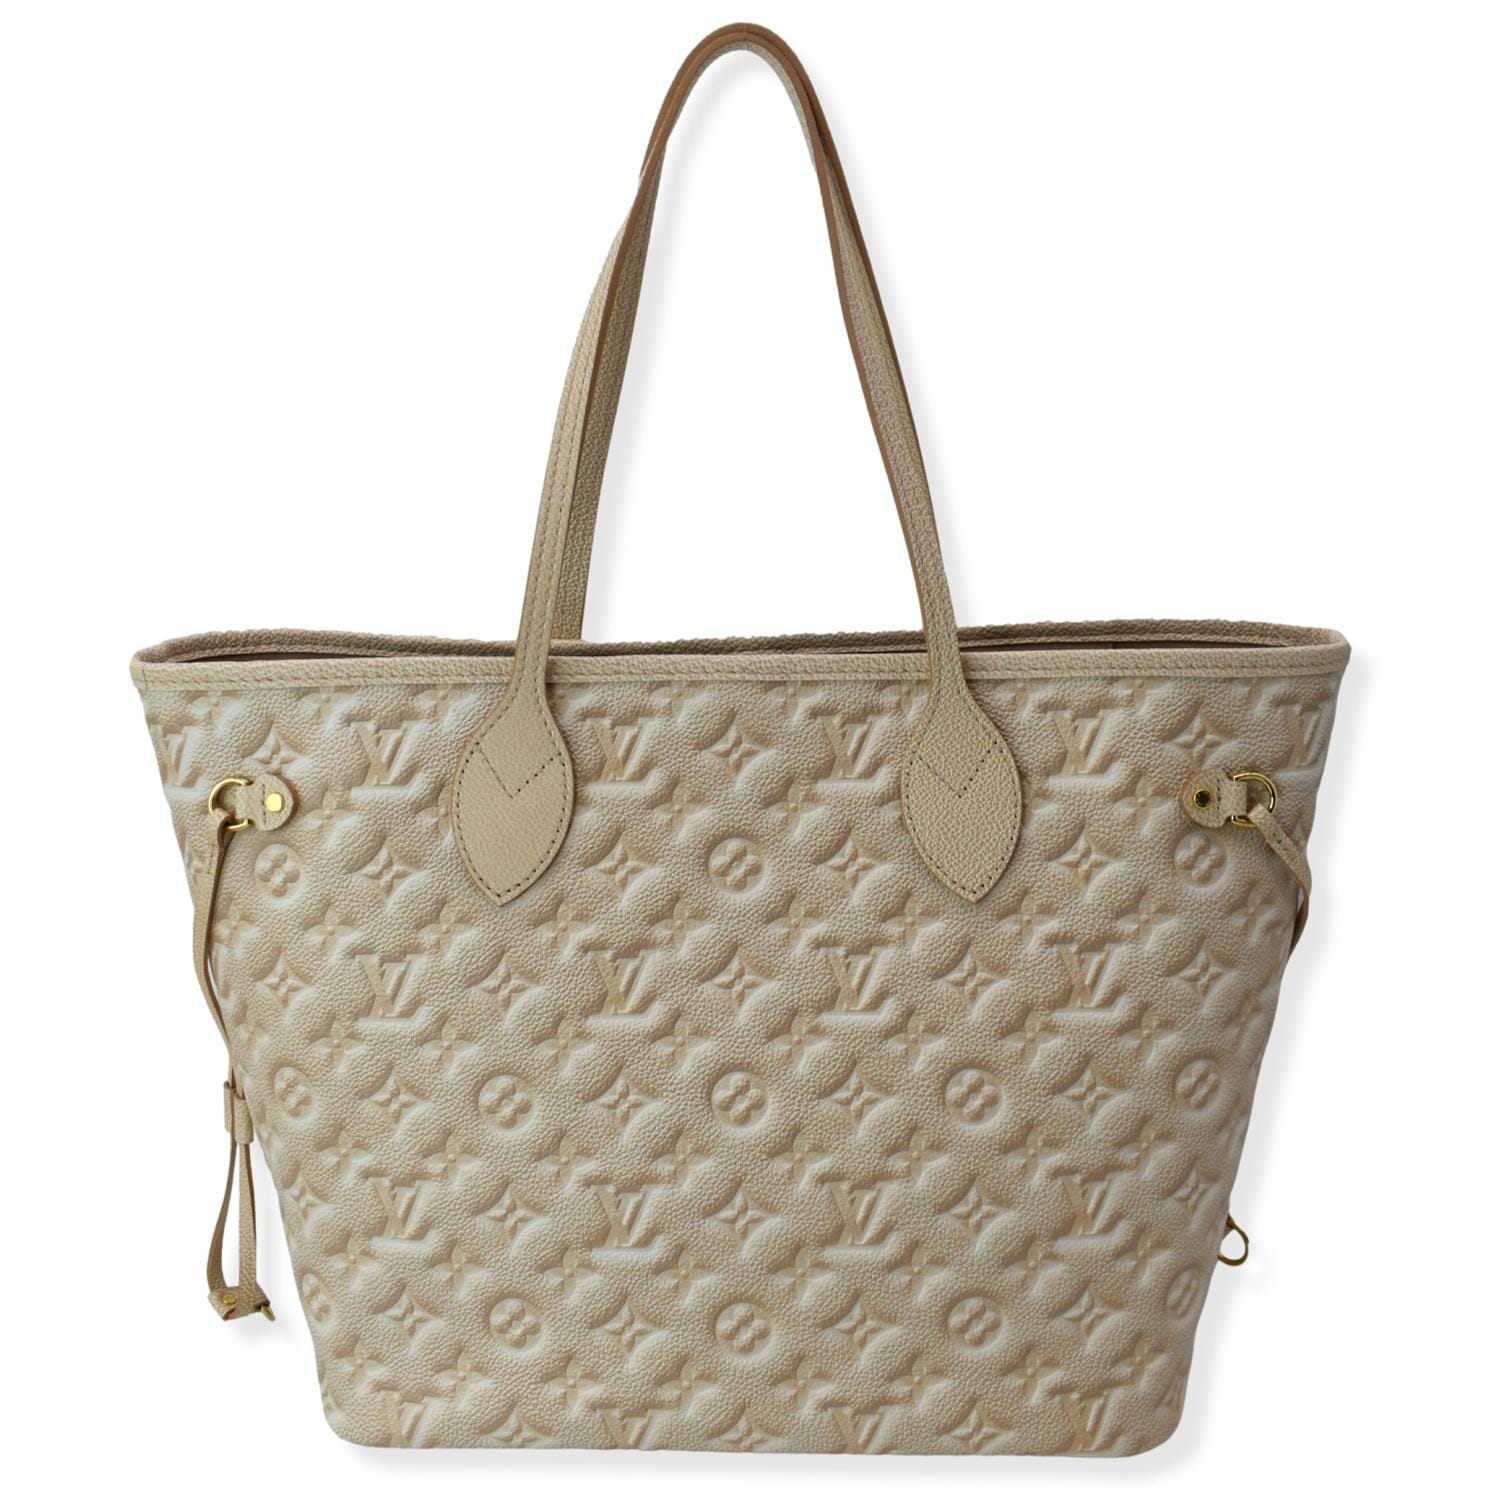 Browse with Me, New Stardust Collection from Louis Vuitton